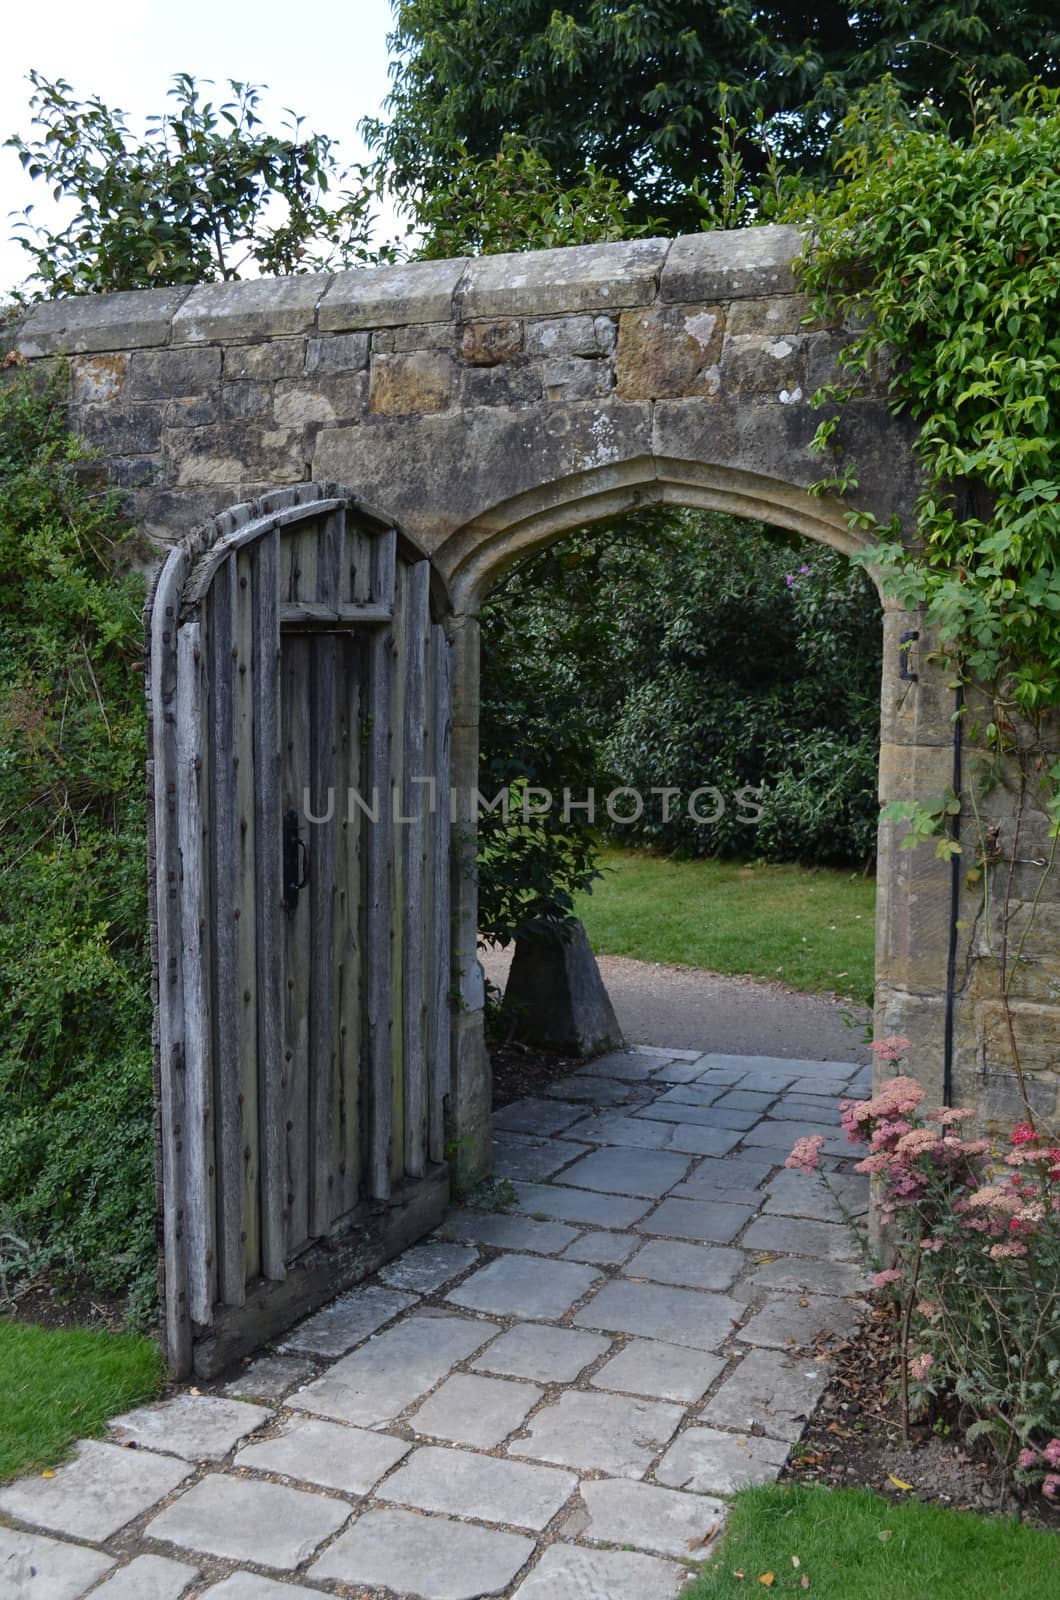 Ancient solid oak door set in the grounds of an English countryside garden.